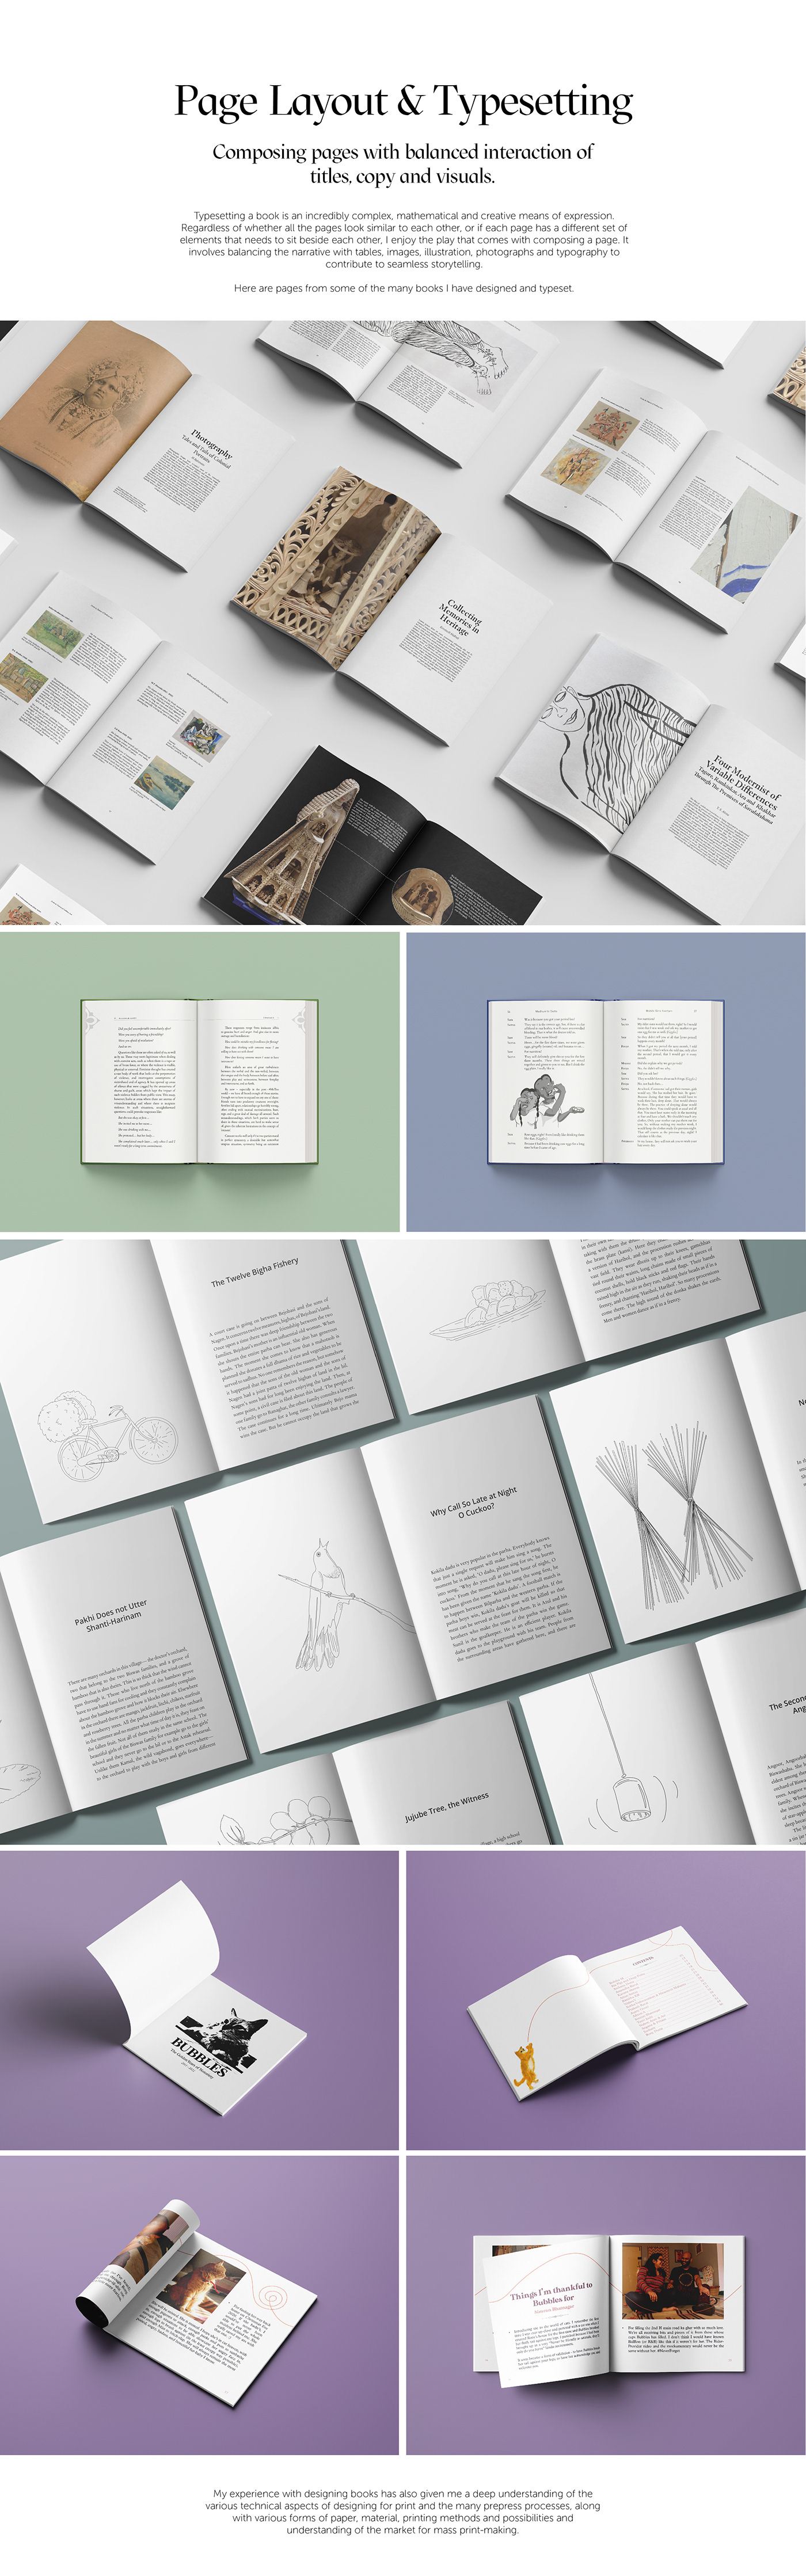 typesetting page layout book design books Book Layout InDesign Layout